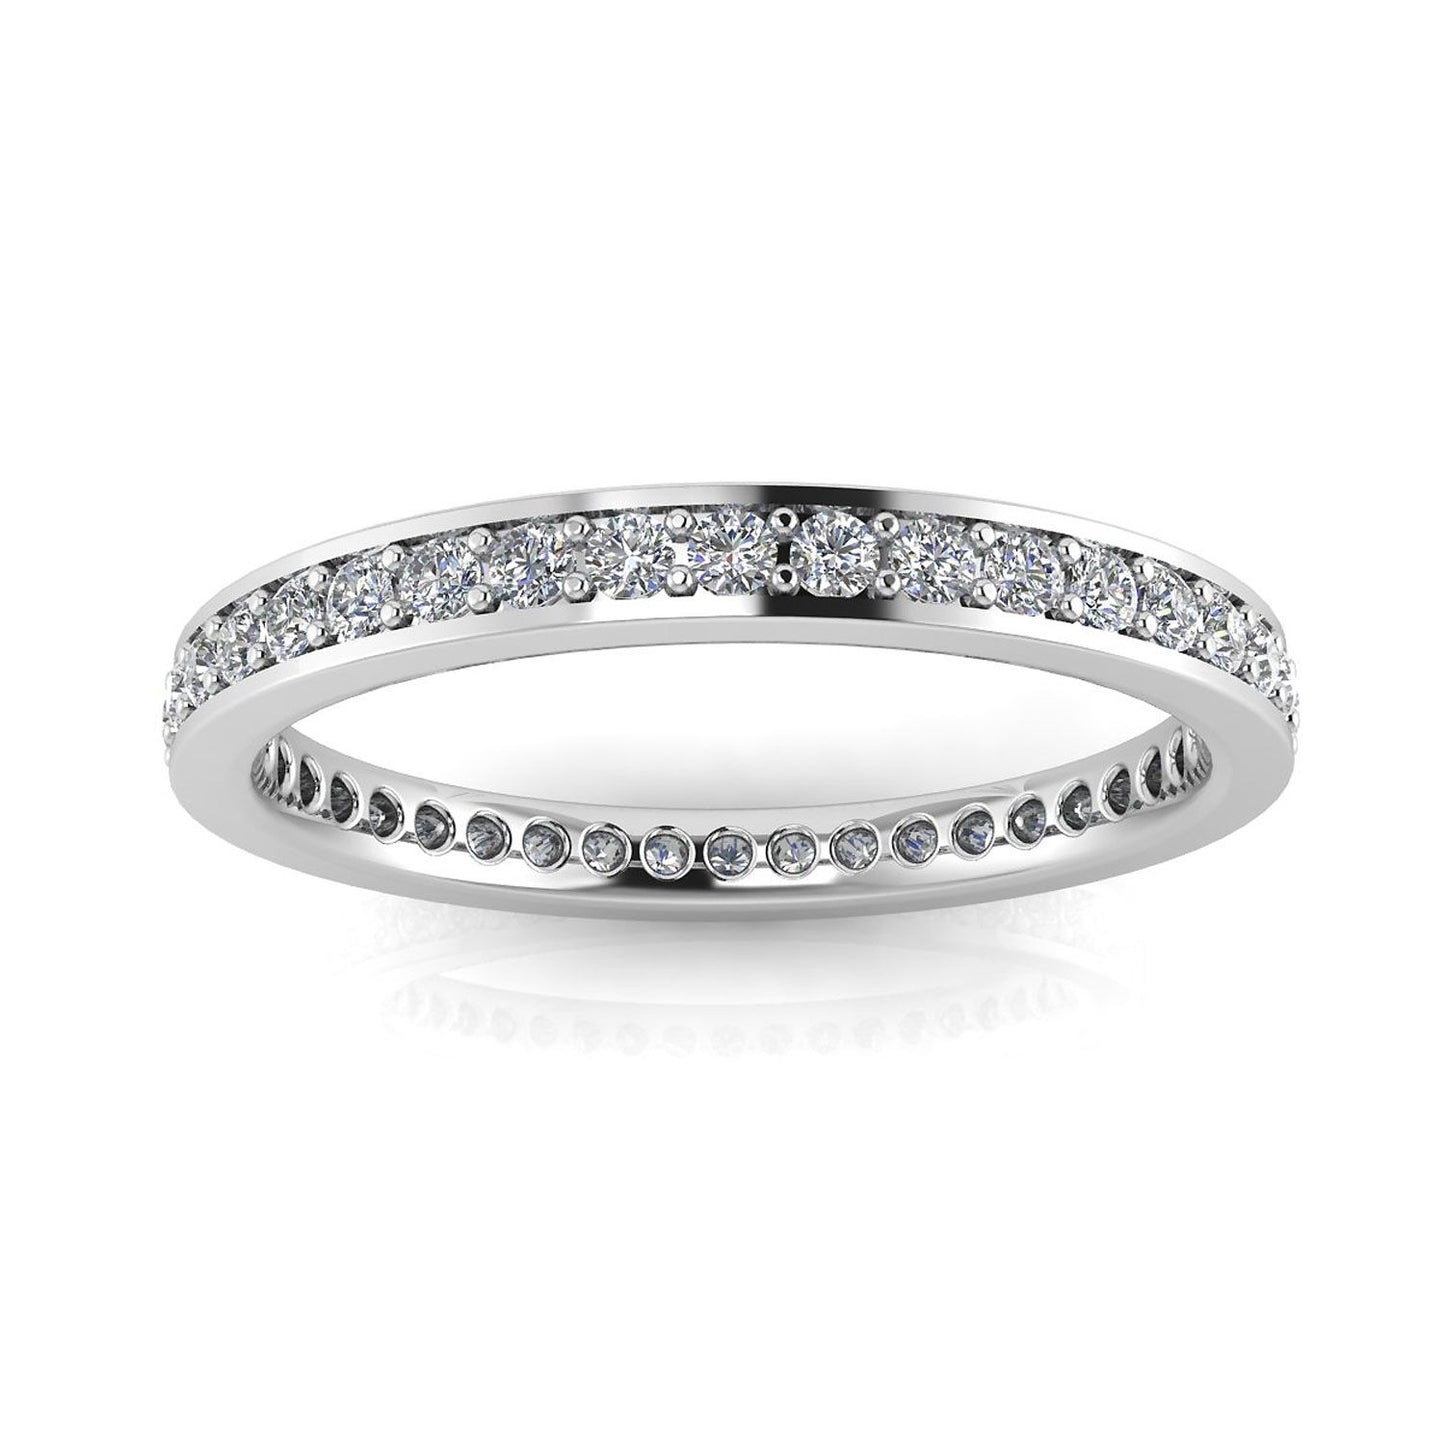 Round Brilliant Cut Diamond Channel Pave Set Eternity Ring In 18k White Gold  (0.48ct. Tw.) Ring Size 7